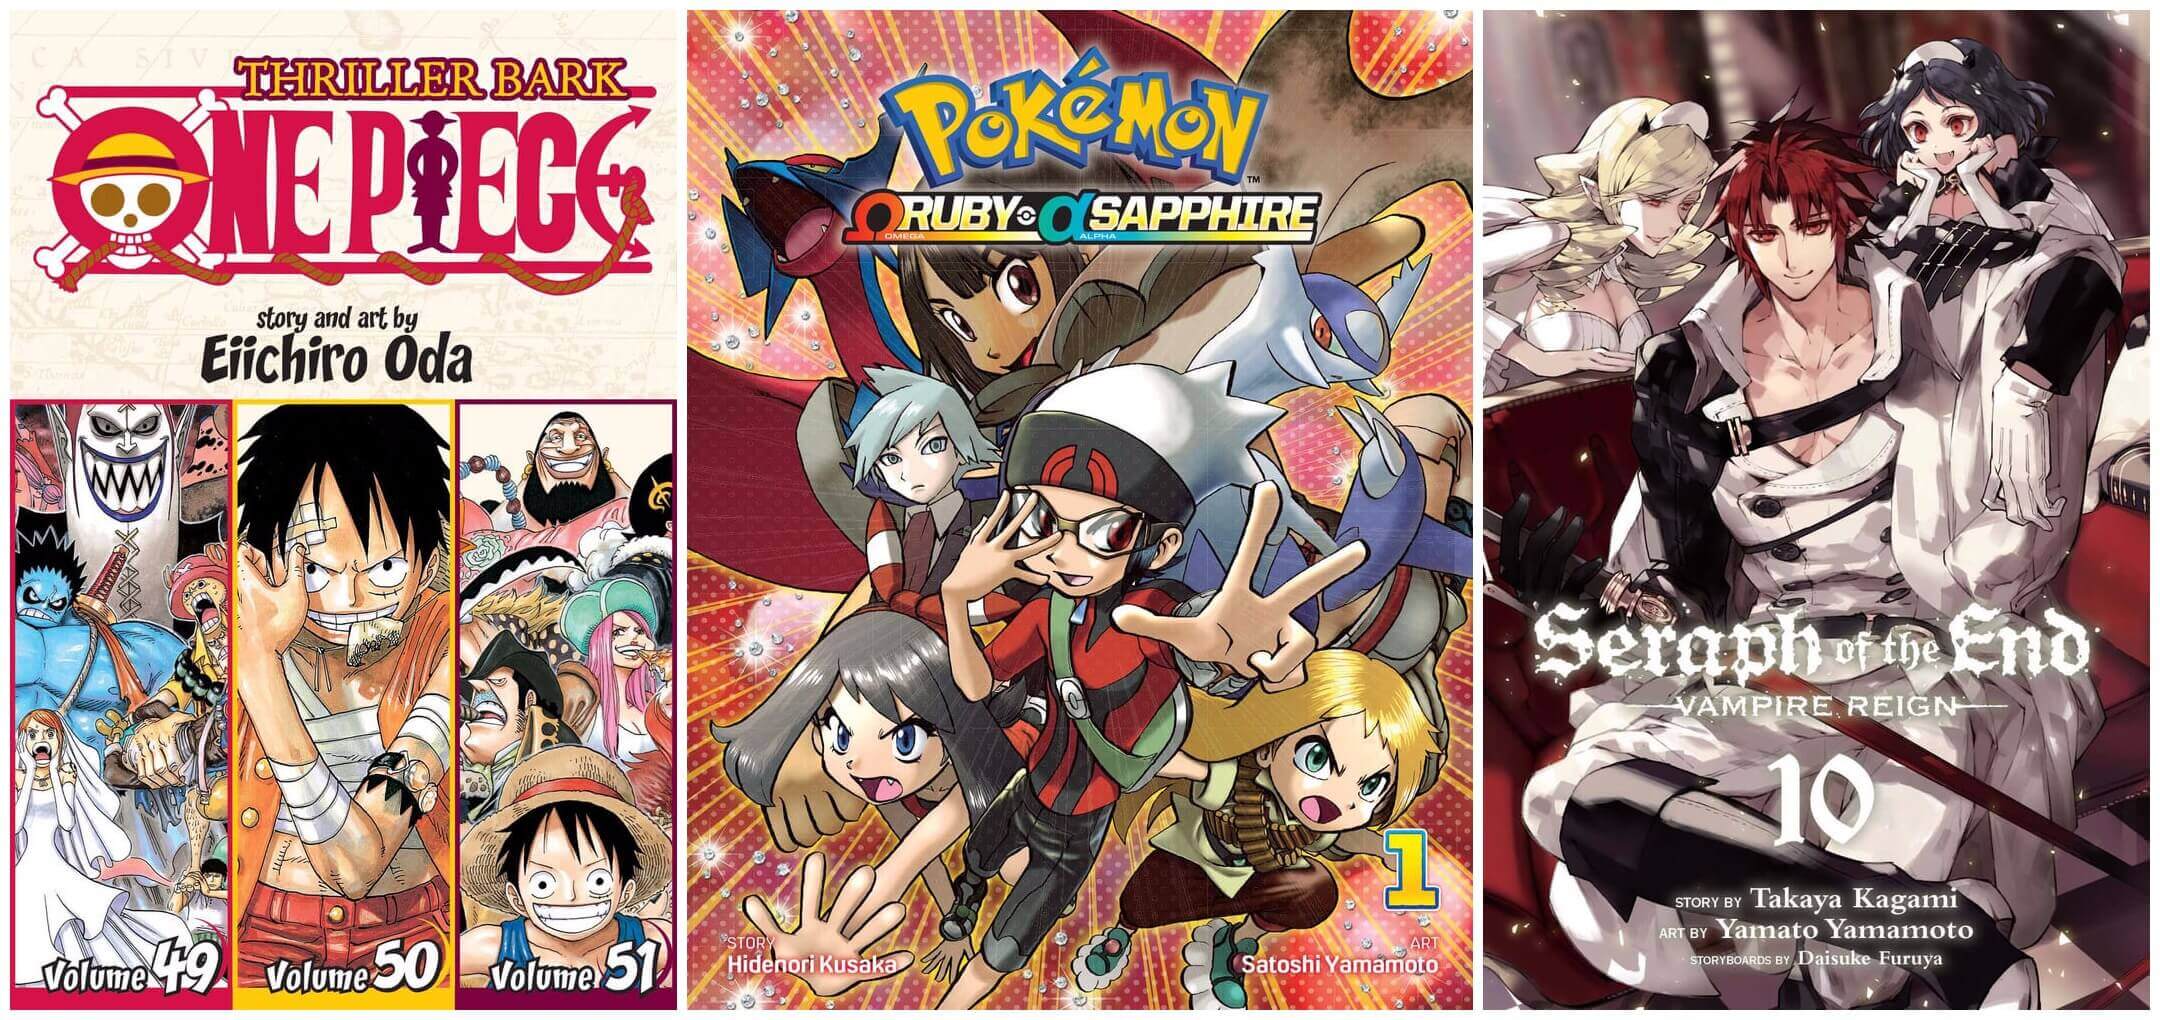 September 2016 Manga Releases Covers for One Piece Omnibus Edition, Pokemon Omega Ruby and Alpha Sapphire, and Seraph of the End.